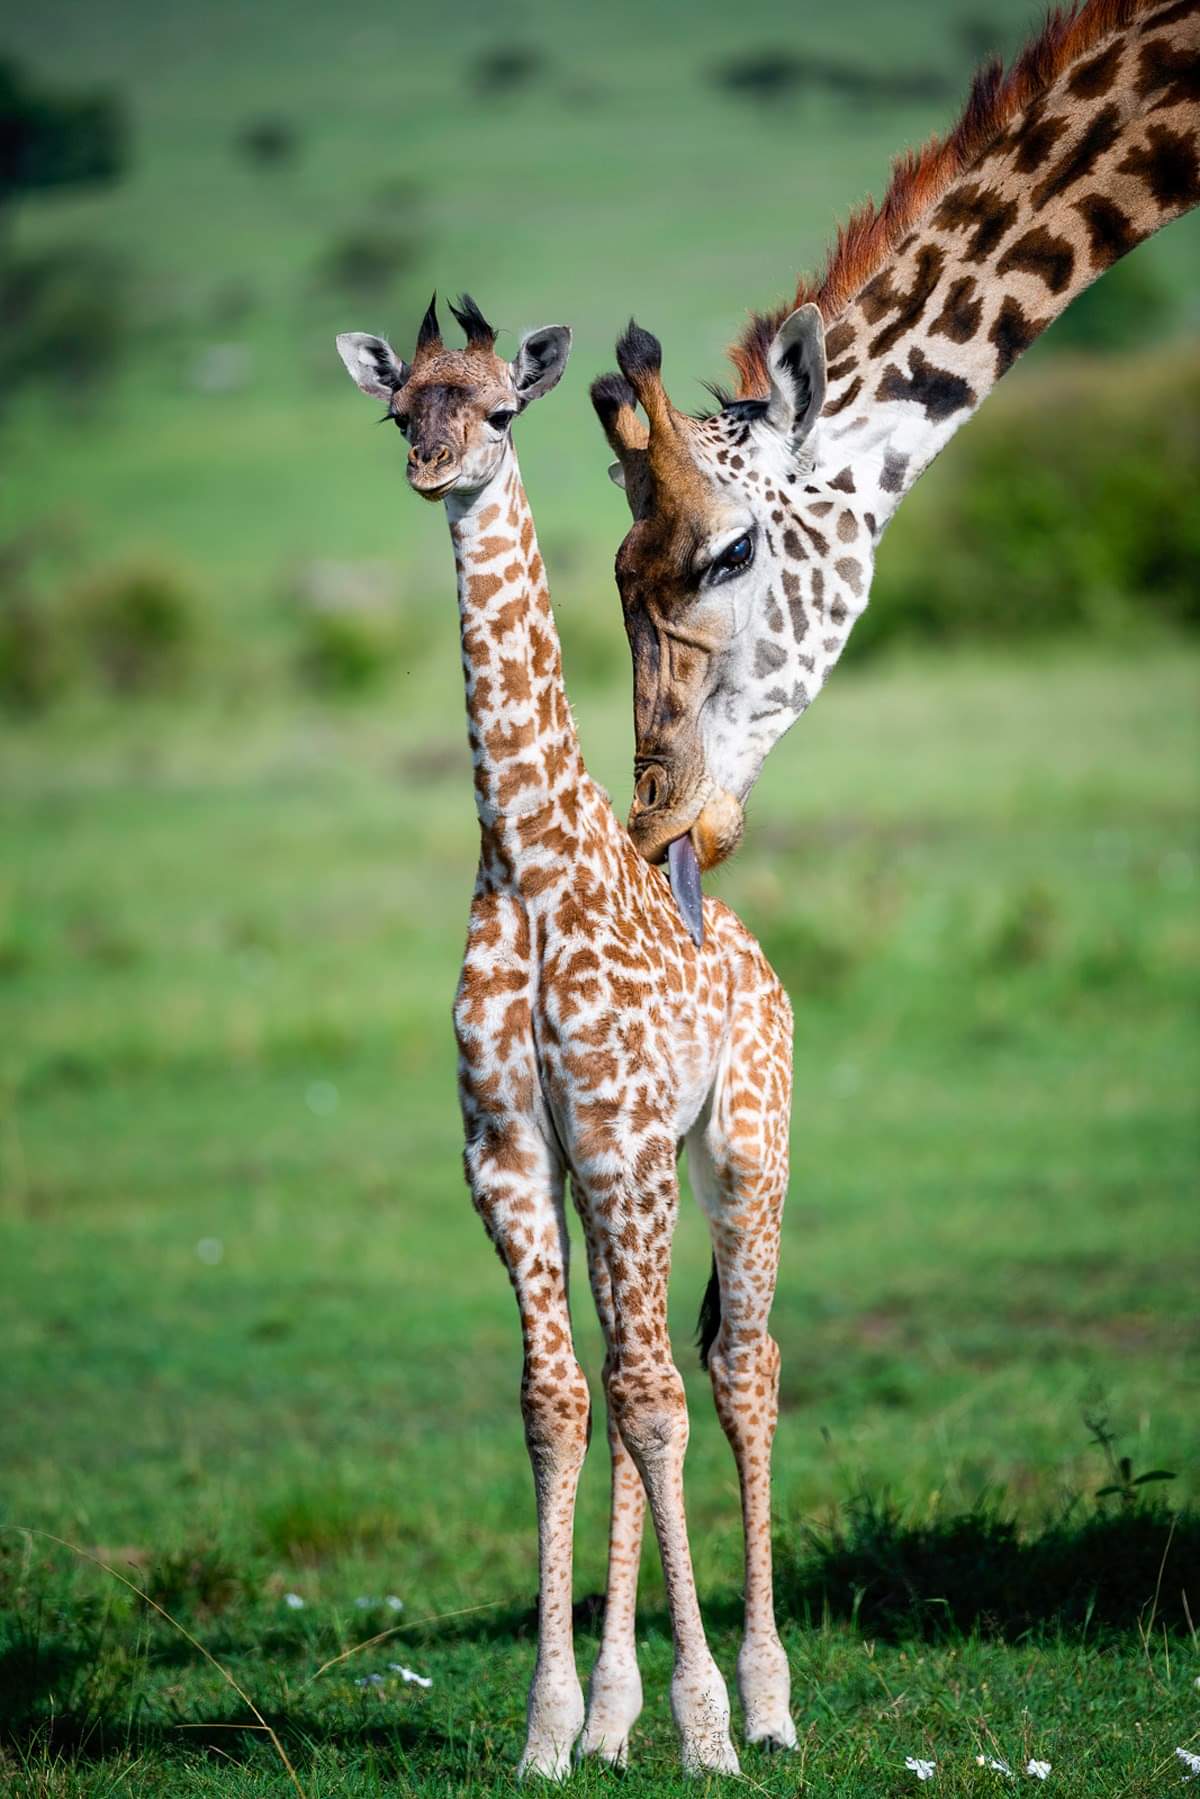 A giraffe and kid in the grass